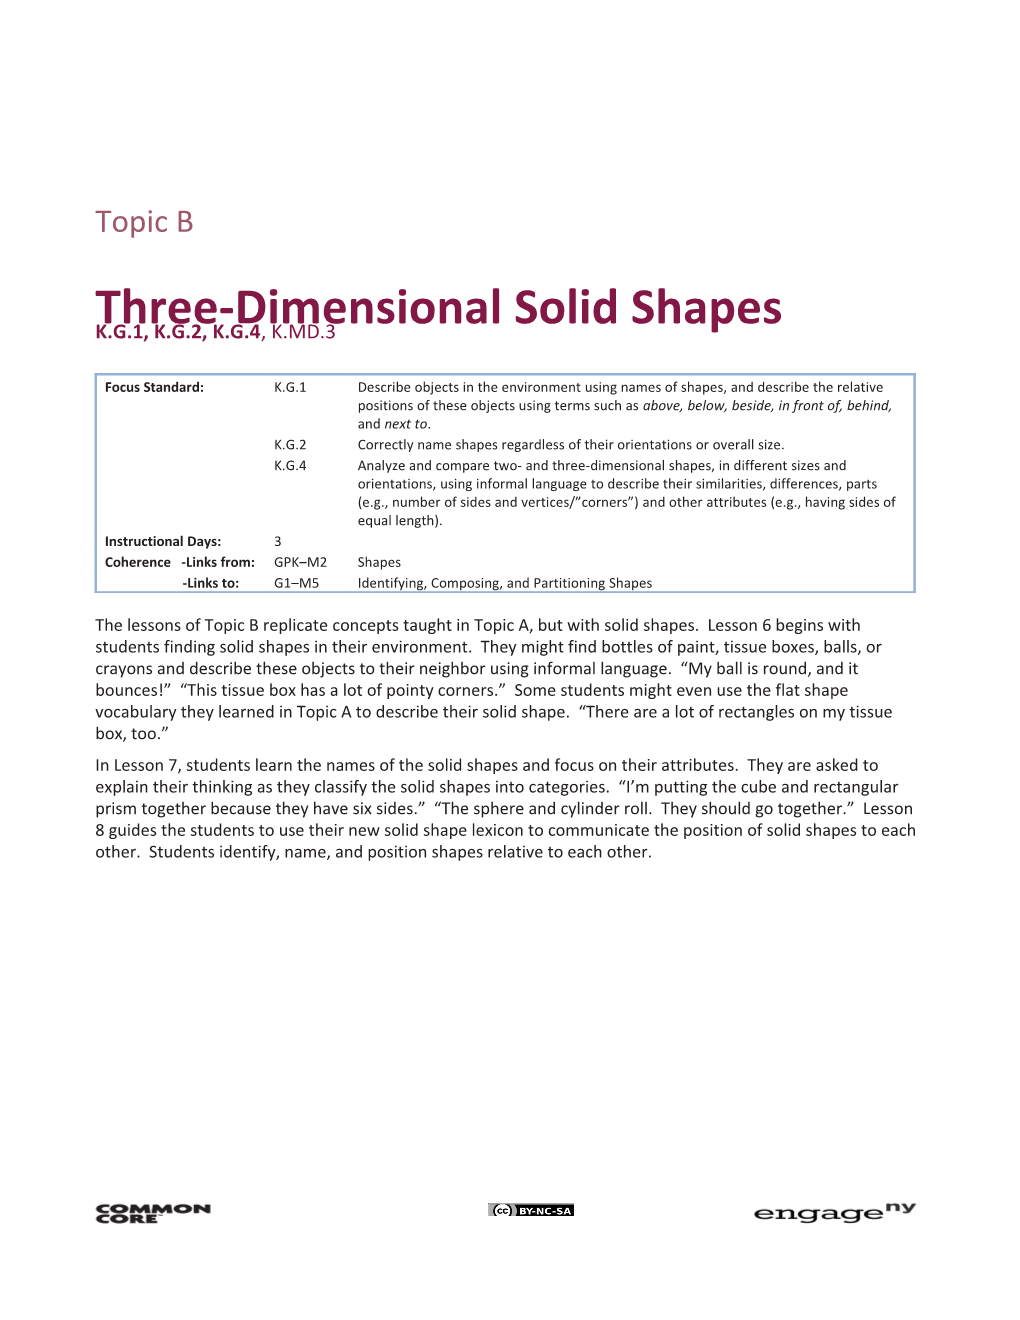 Three-Dimensional Solid Shapes